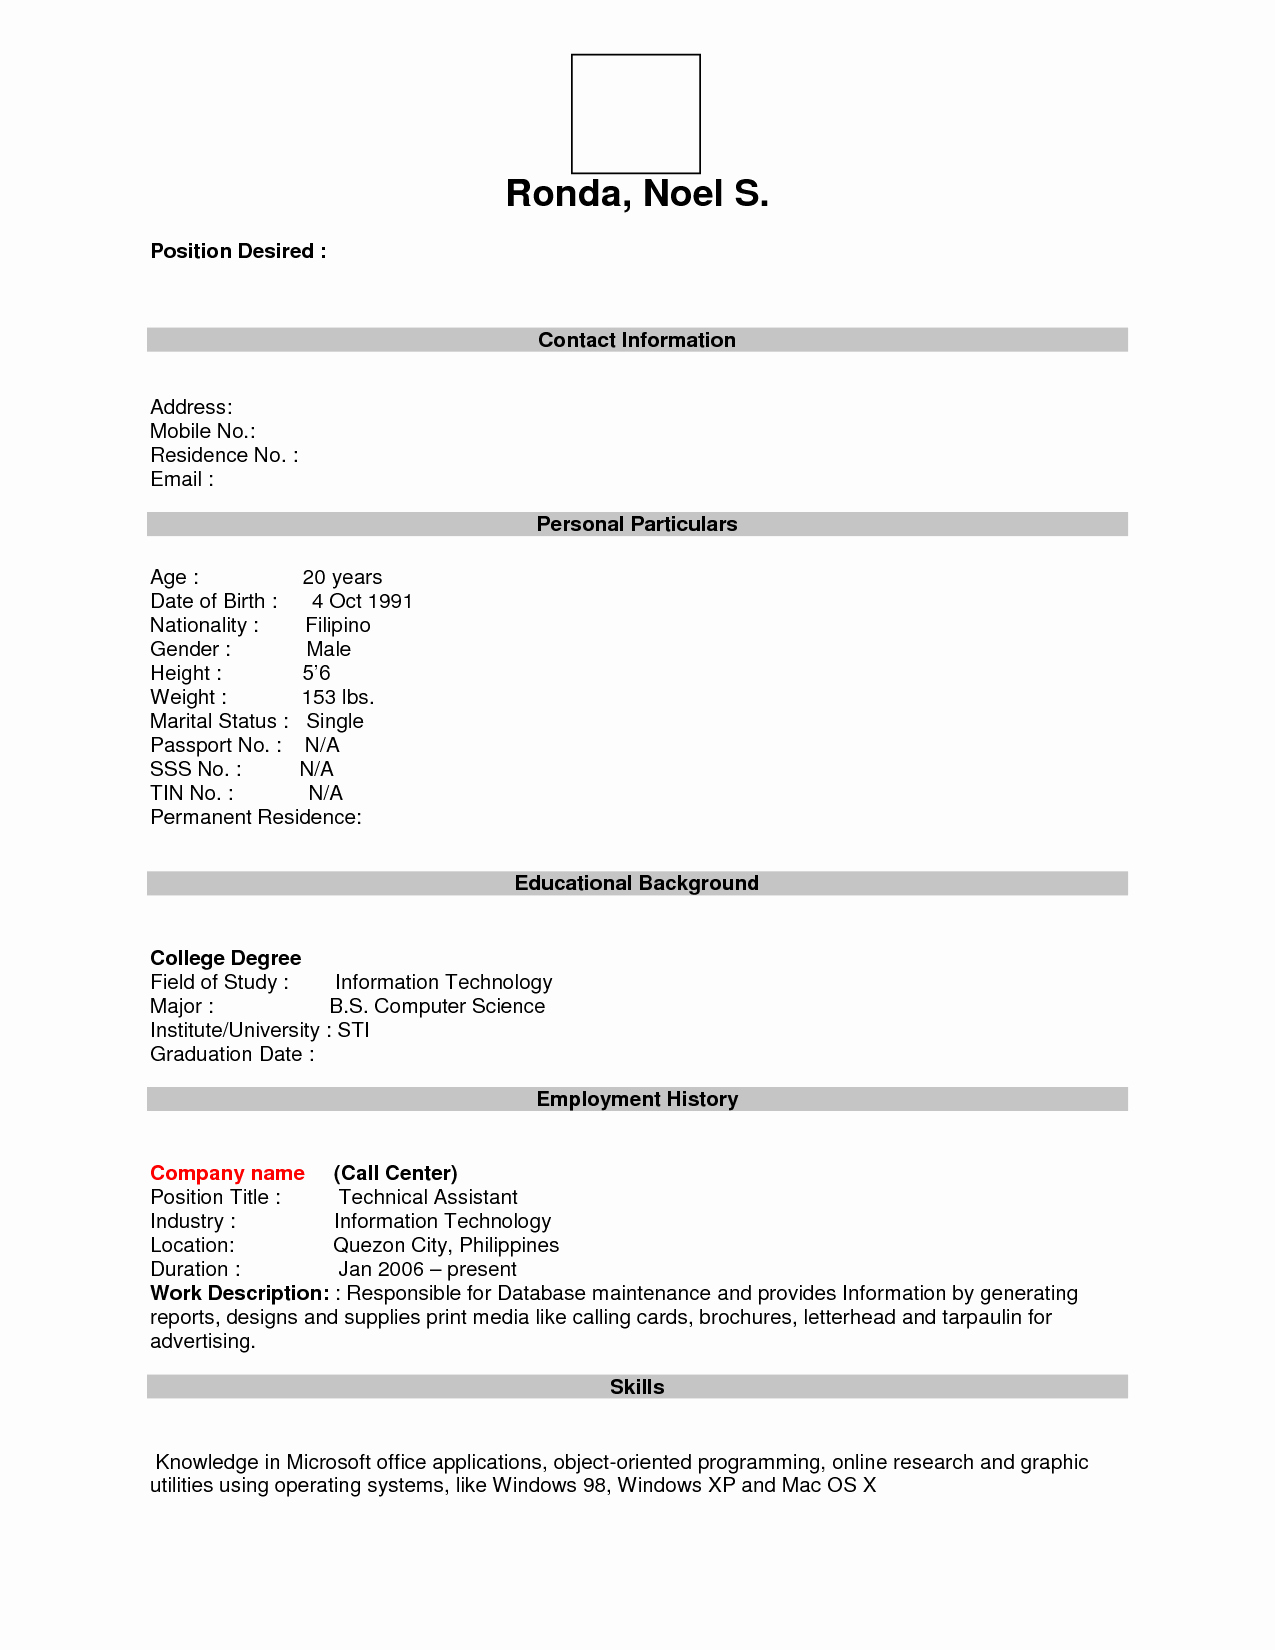 Blank Resume forms to Fill Out Umecareer